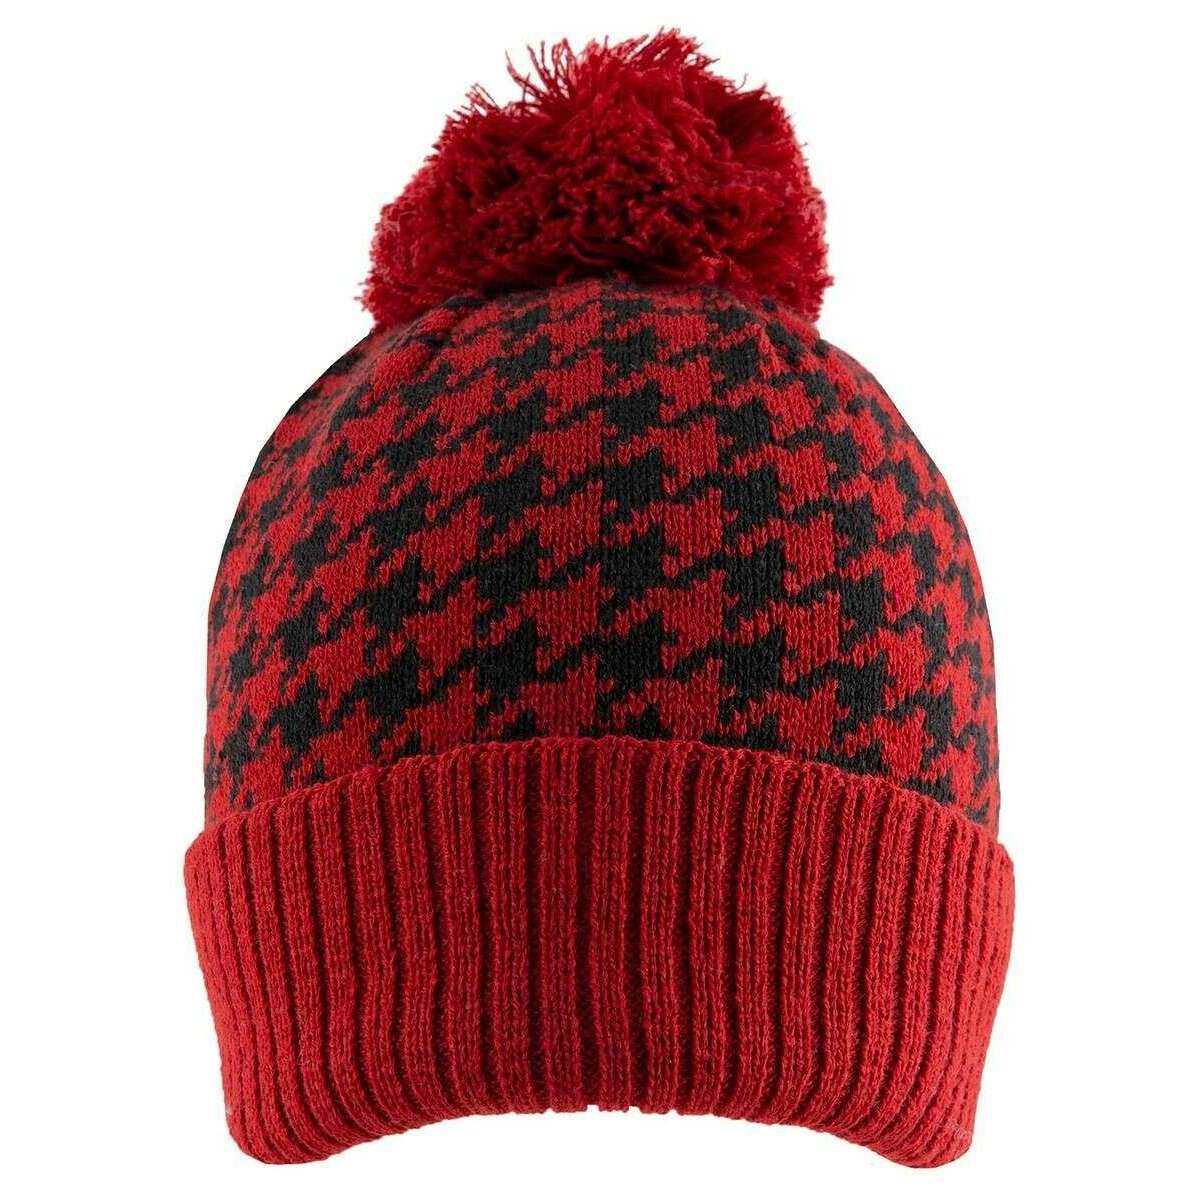 Dents Knitted Dogtooth Pattern Bobble Hat - Berry Red/Black